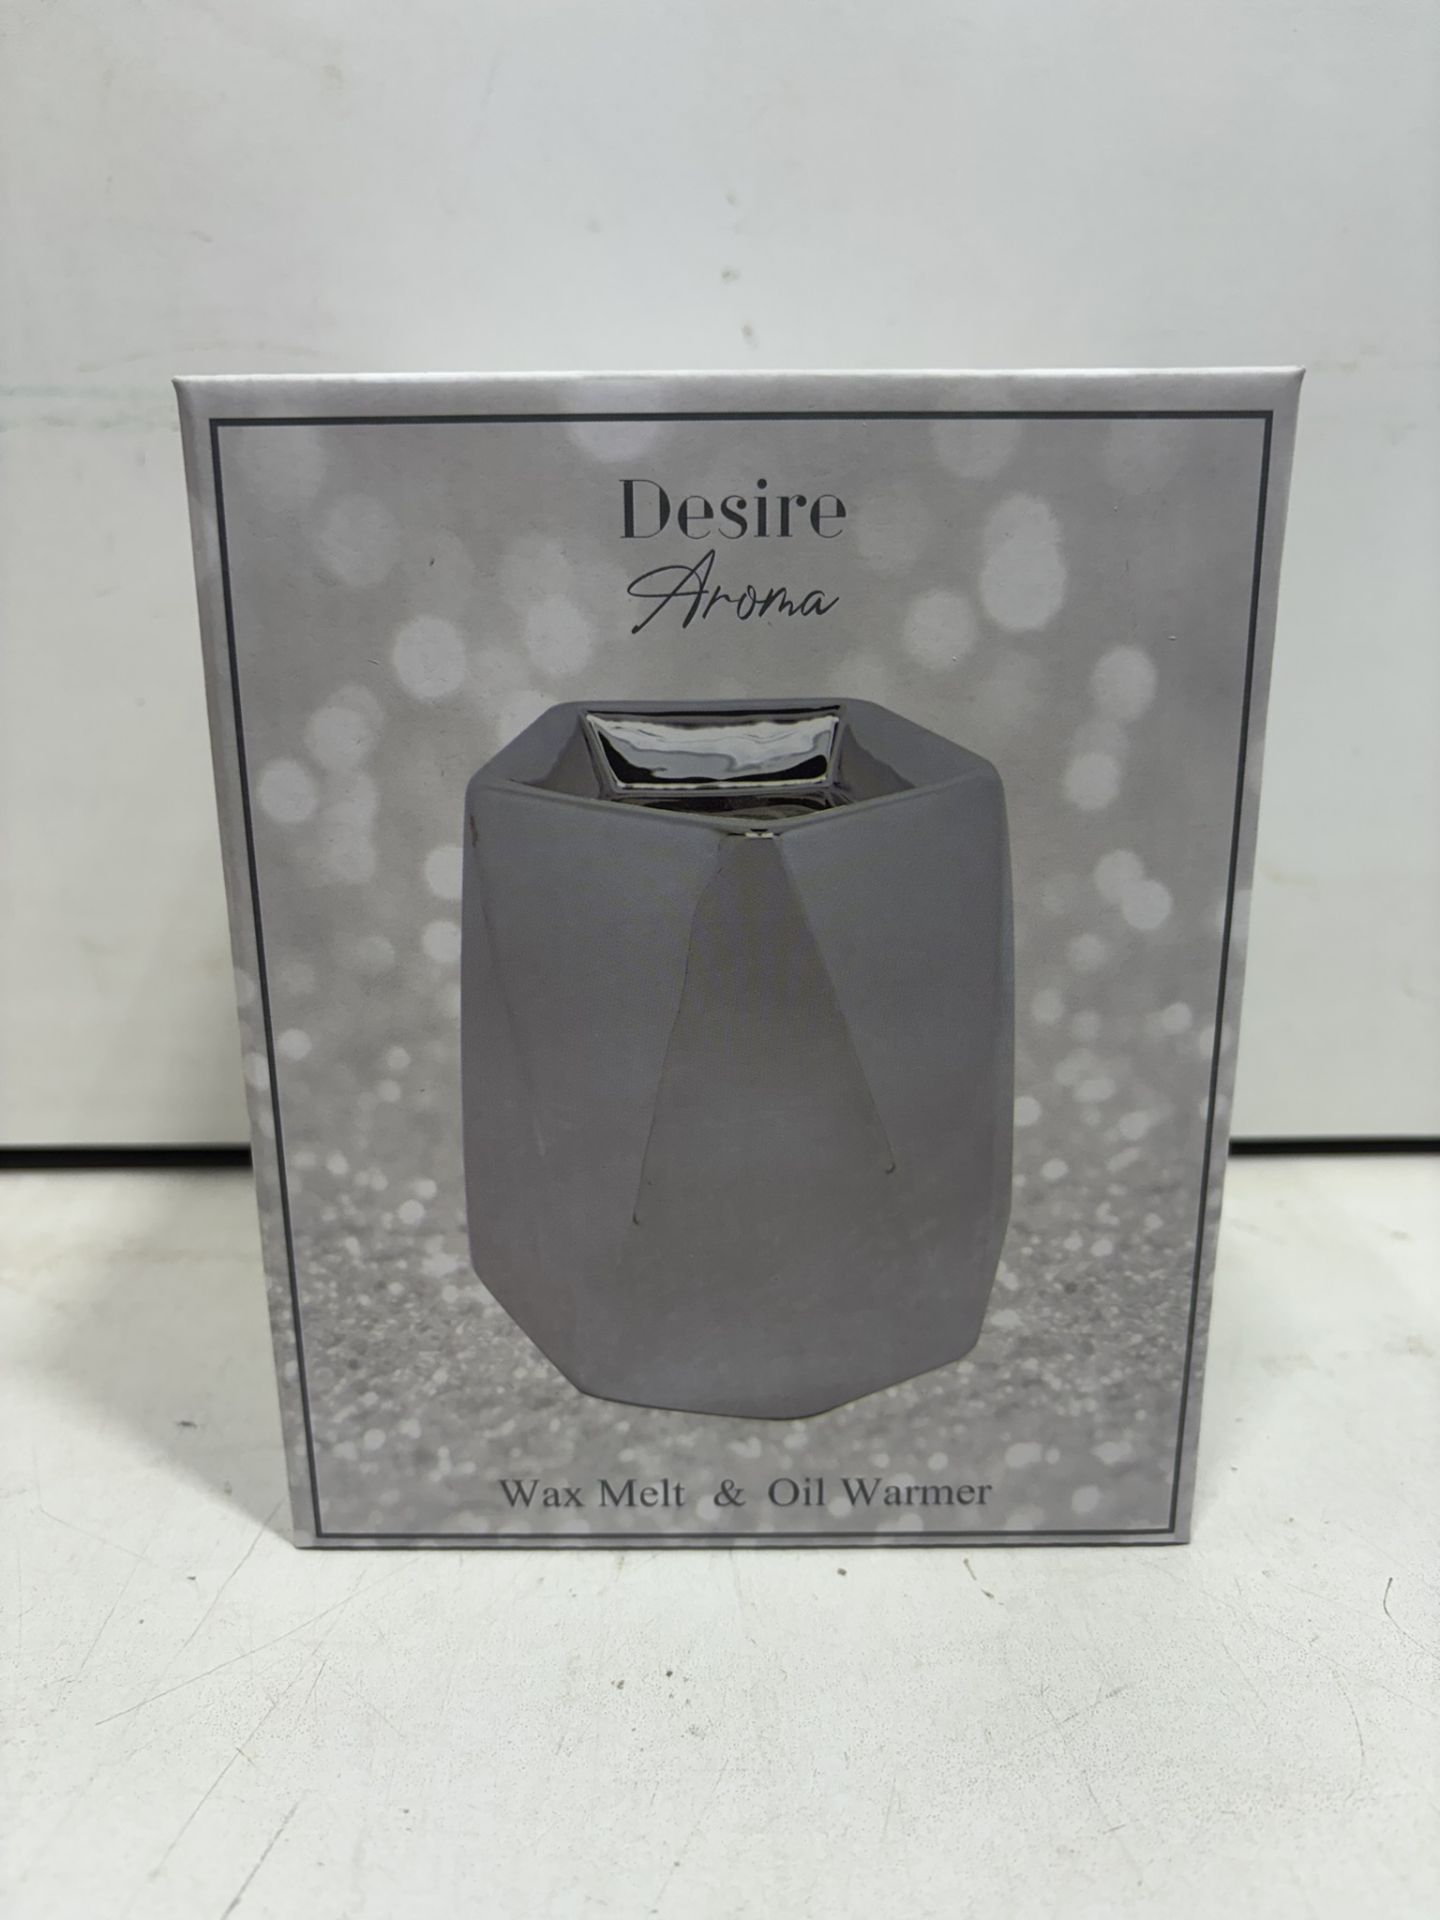 18 x Lesser & Pavey Silver Desire Aroma Wax Melt & Oil Warmers